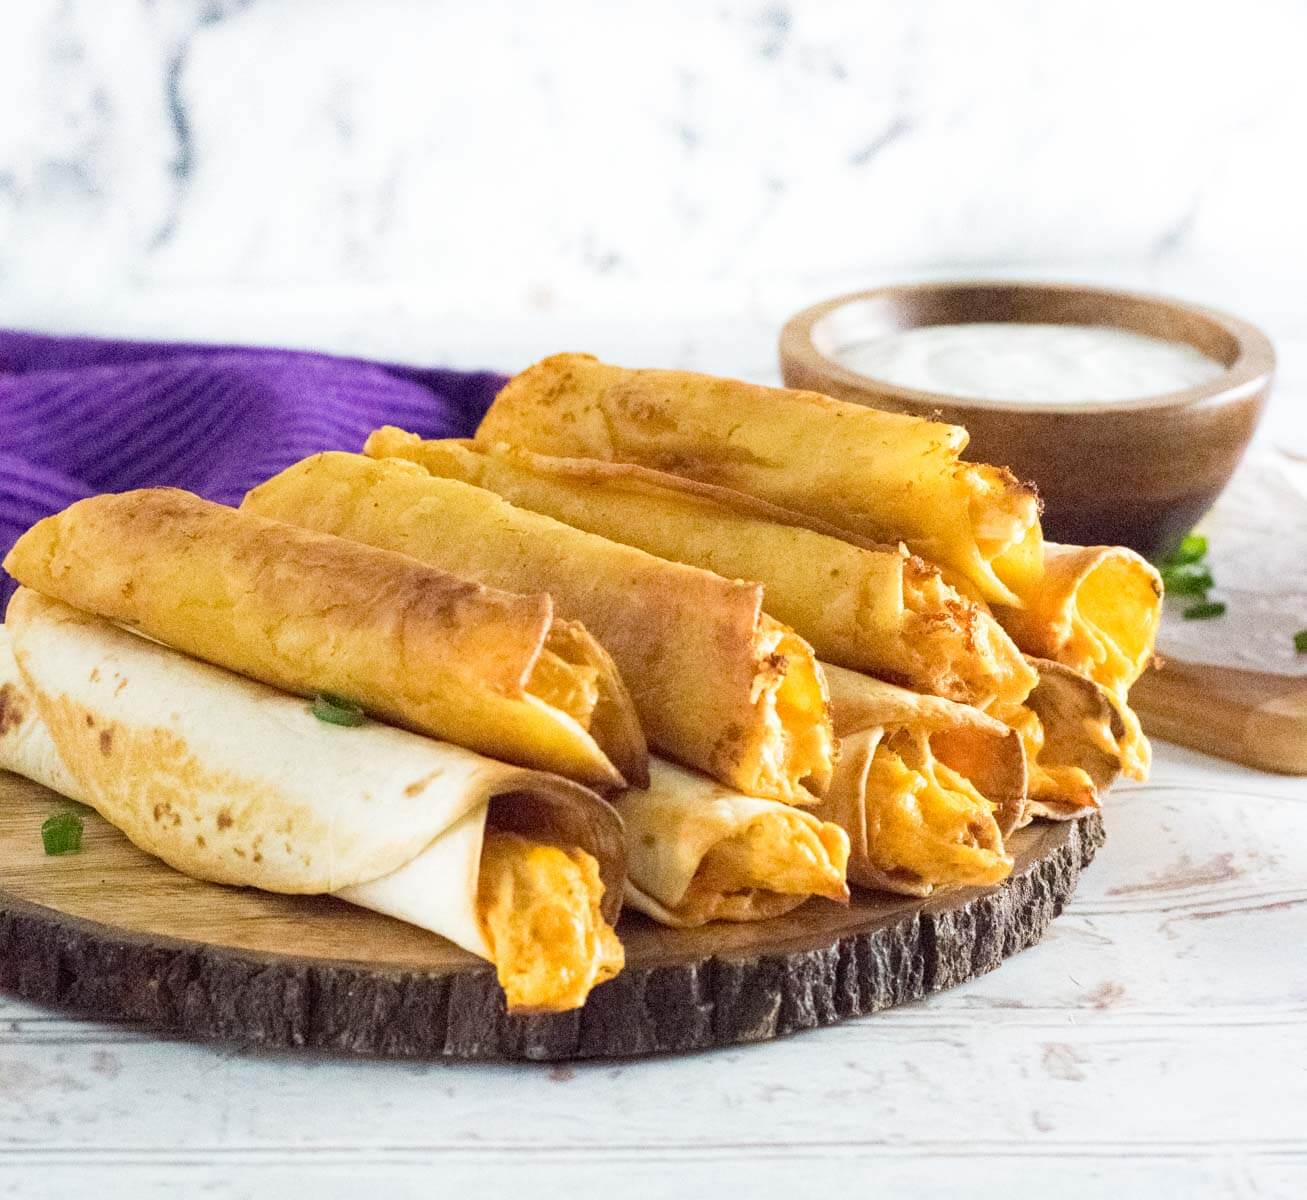 Baked and fried taquitos served with dipping sauce with a purple towel shown. 